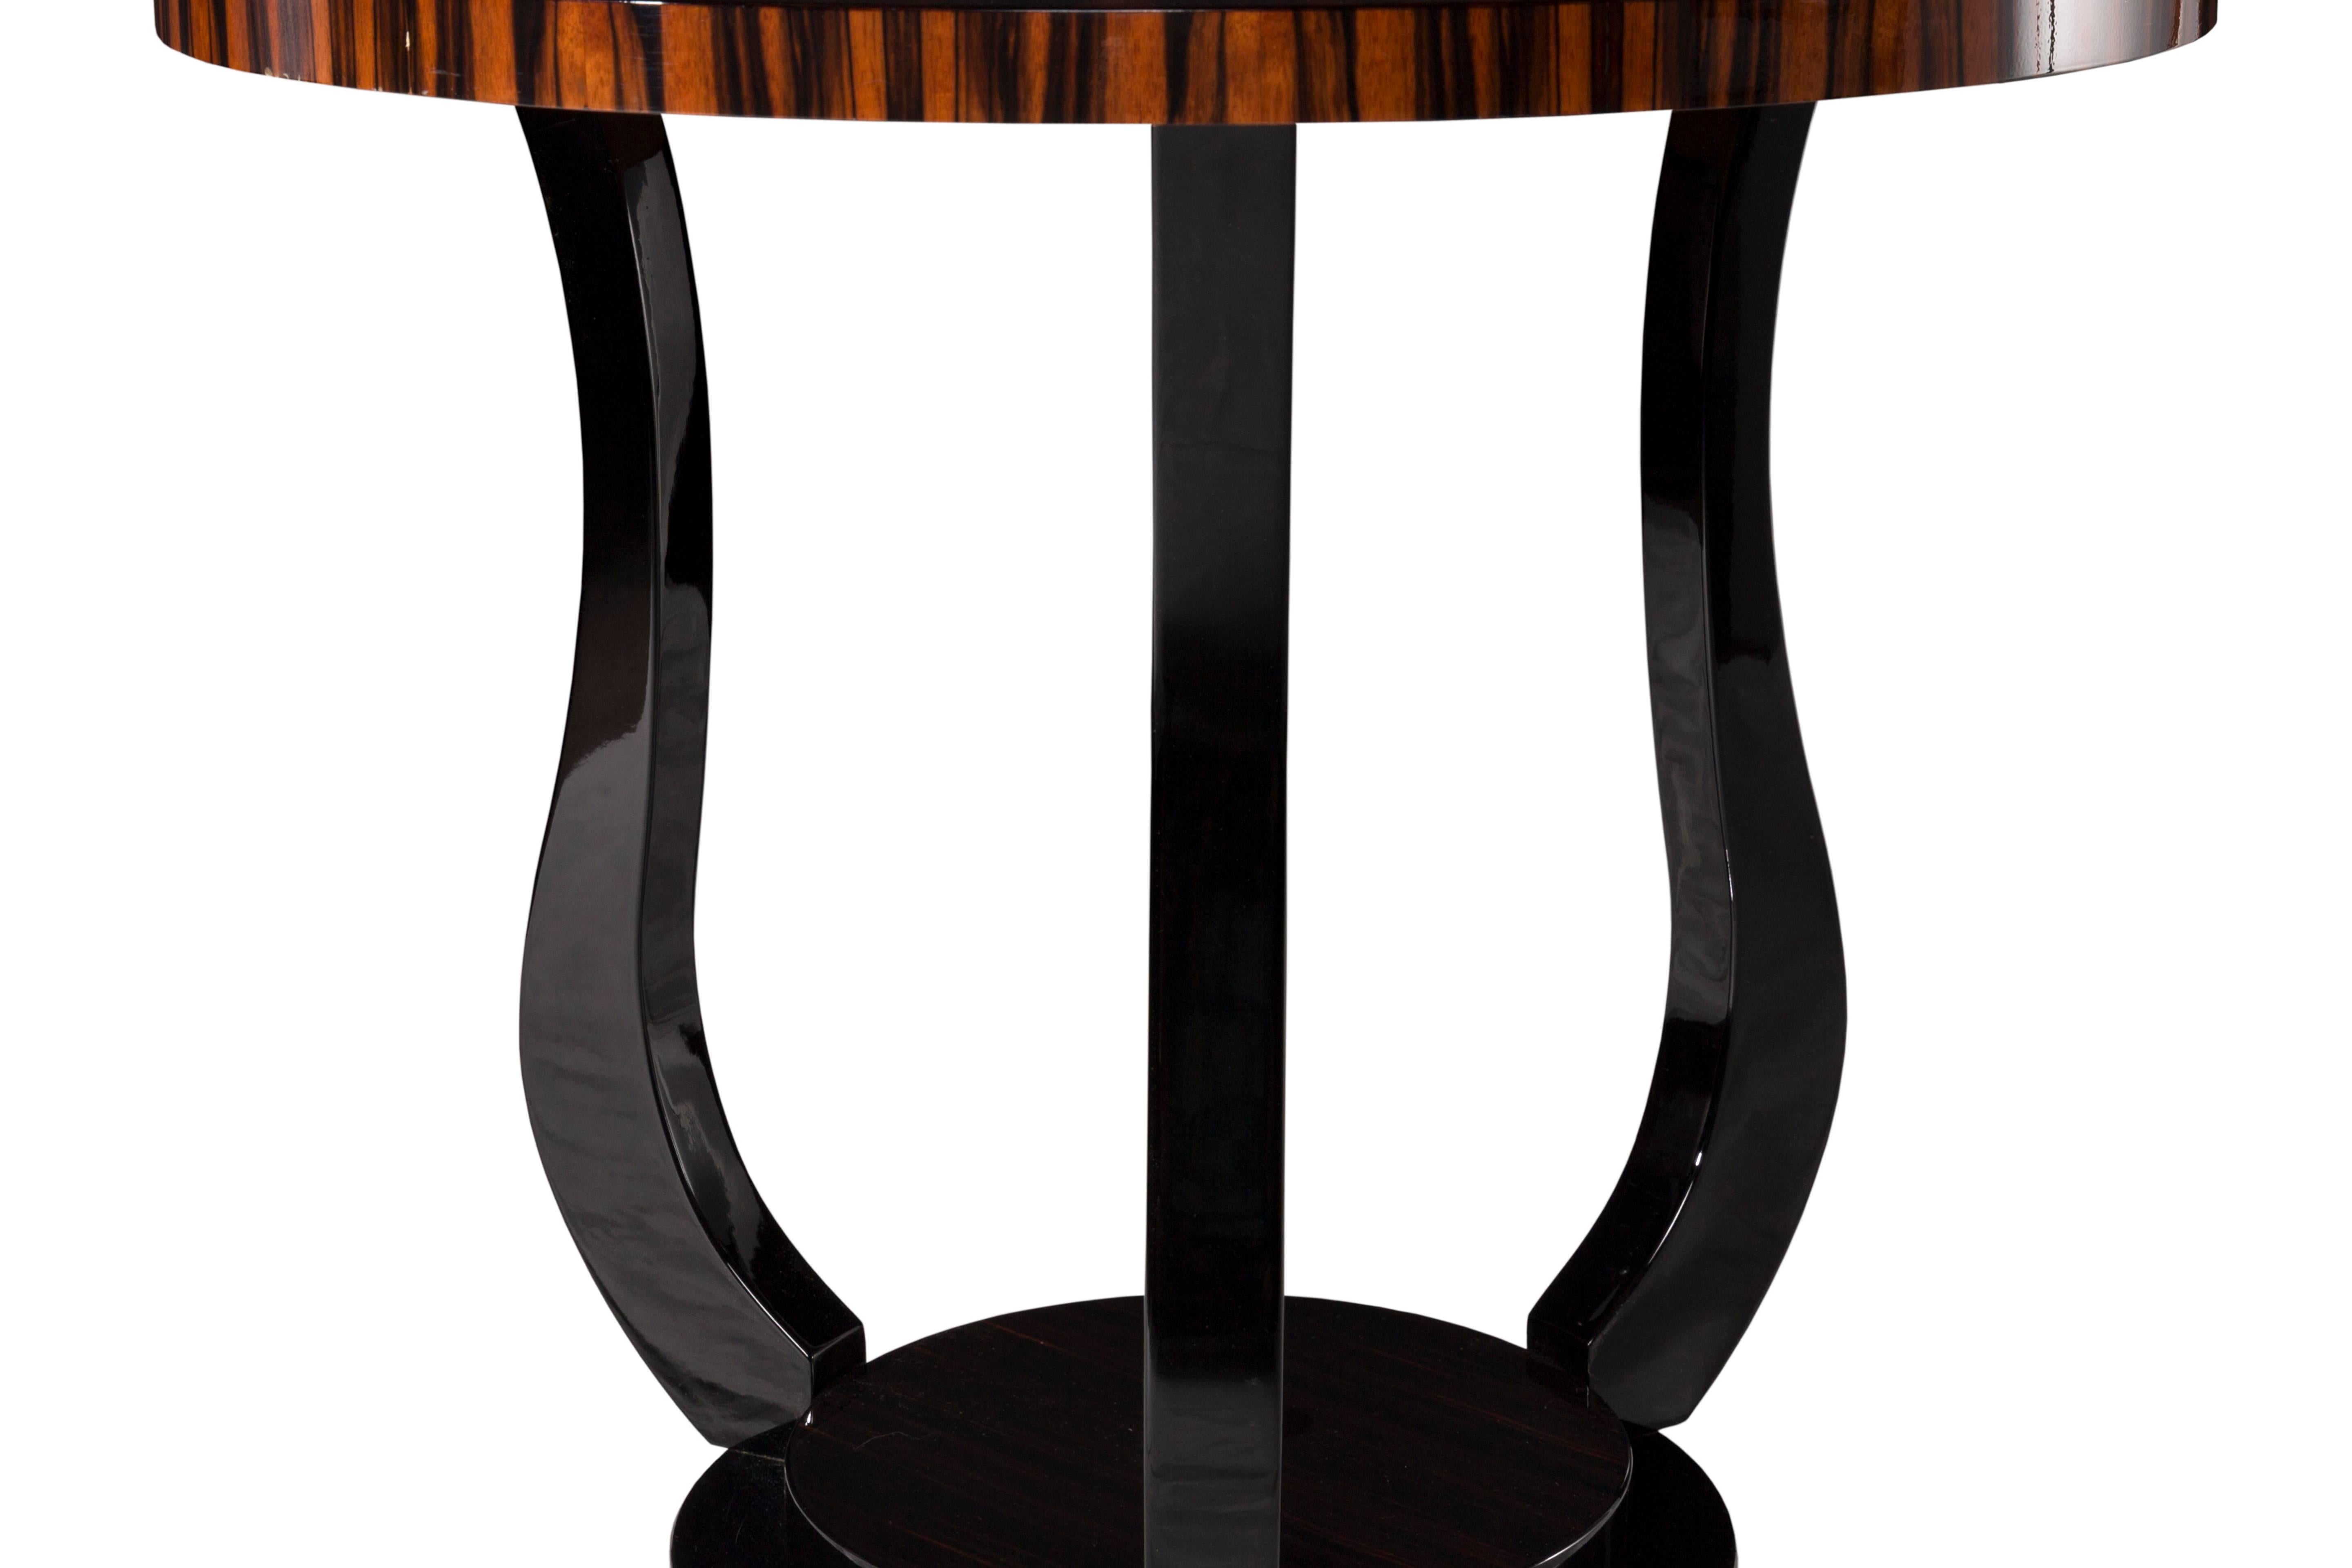 A pair of French origin ebony Macassar veneered art-deco tables. This very elegant model can be used as a side table or a coffee table as well as a centre table.
The base is black lacquered and the ebony Macassar tabletop is finished with a hard